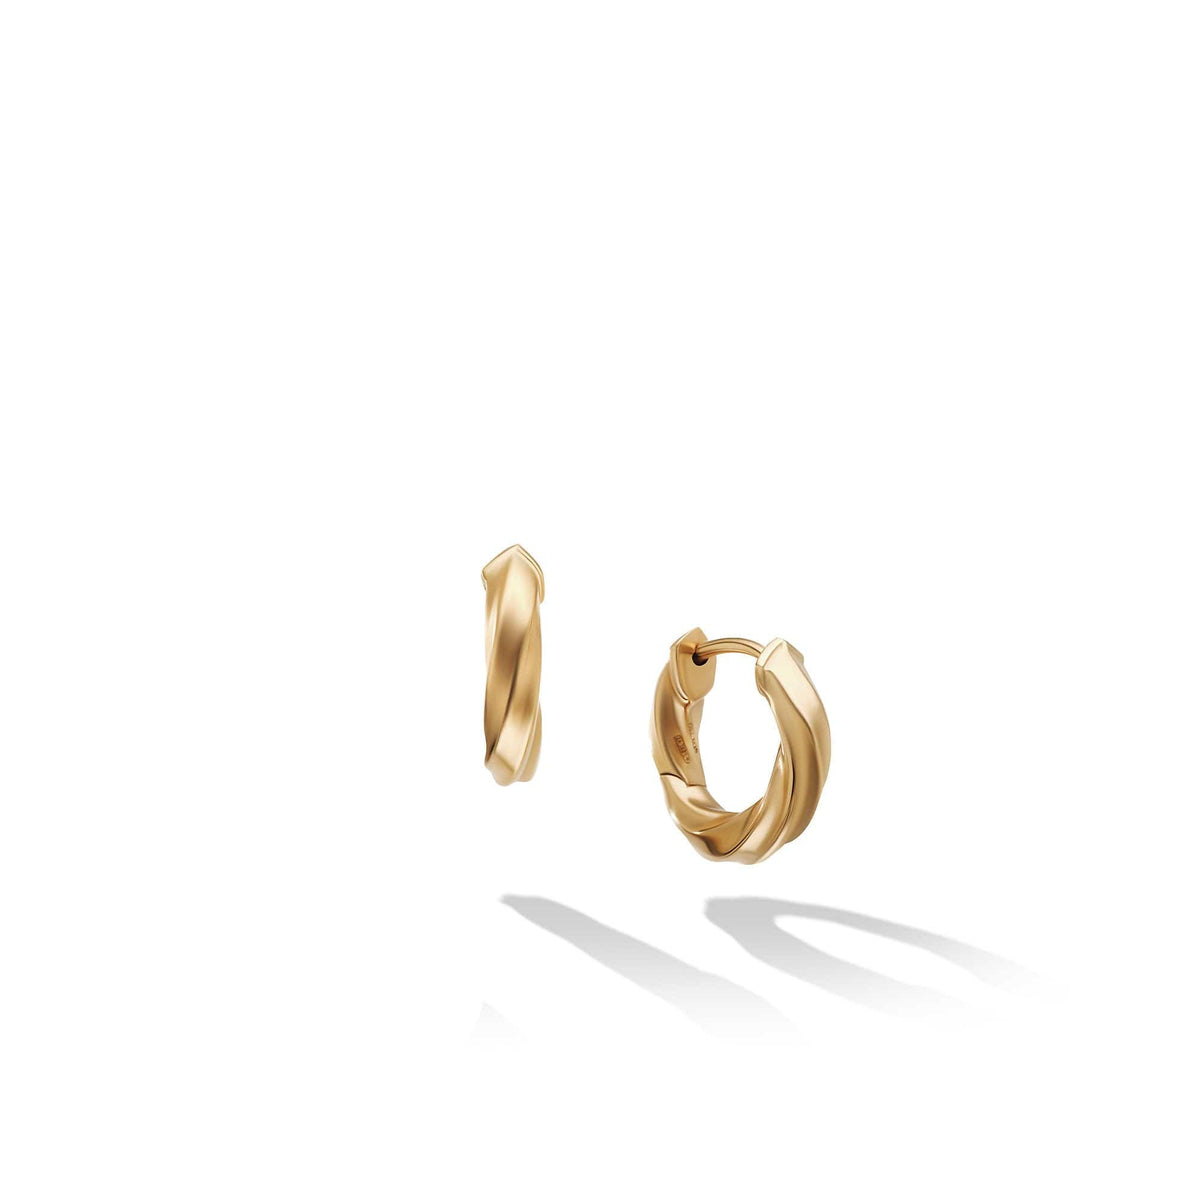 Cable Edge Huggie Hoop Earrings in Recycled 18K Yellow Gold, Long's Jewelers